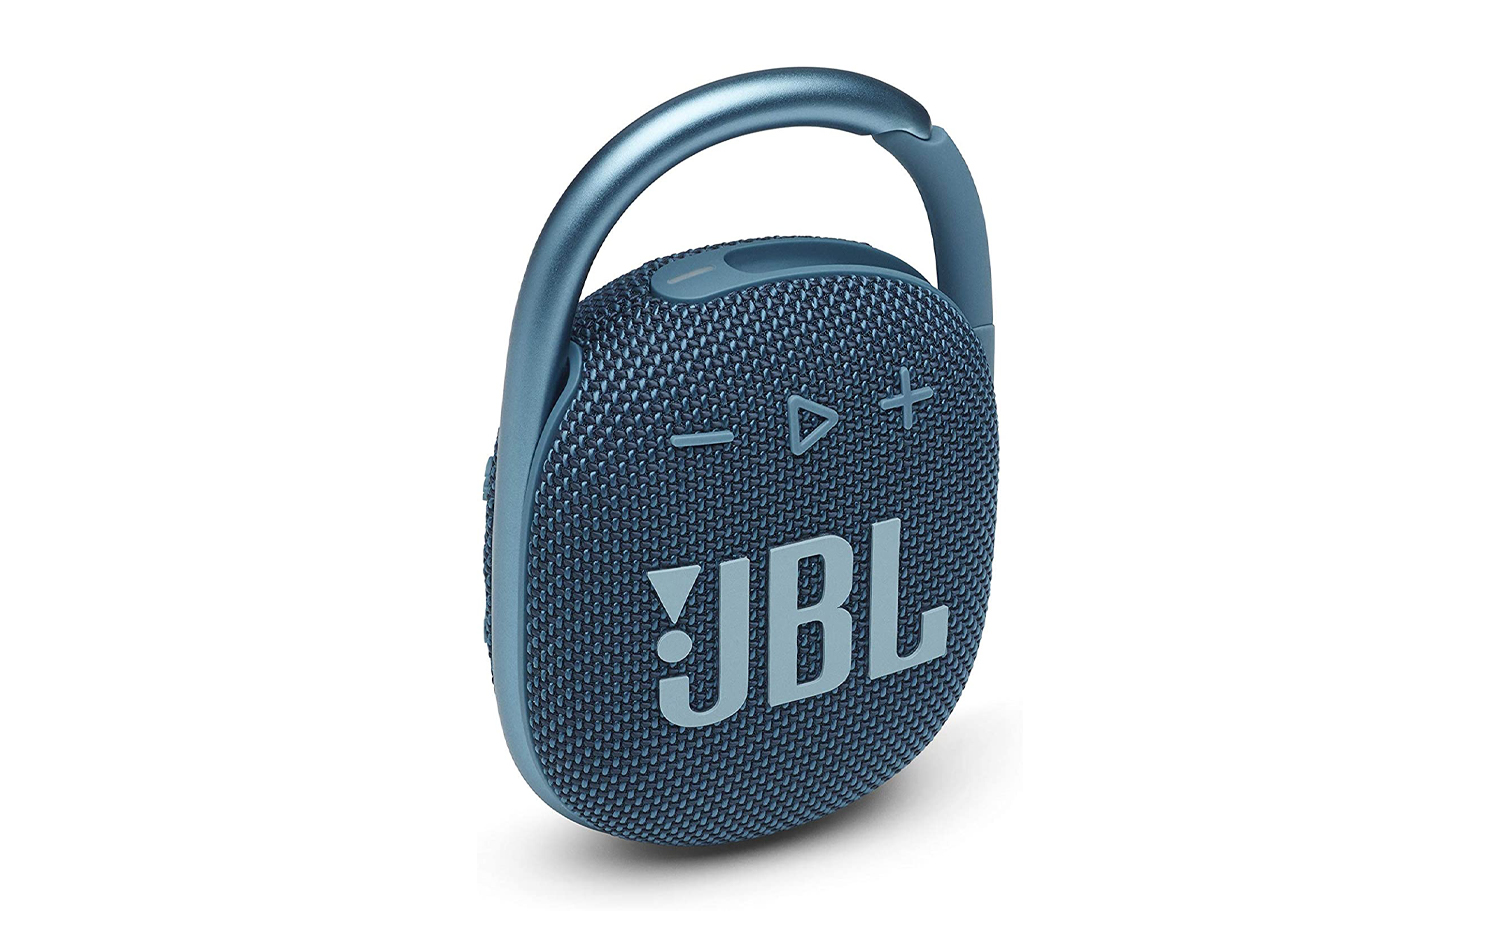 best back to school accessories for MacBook: JBL Clip 4 on white background